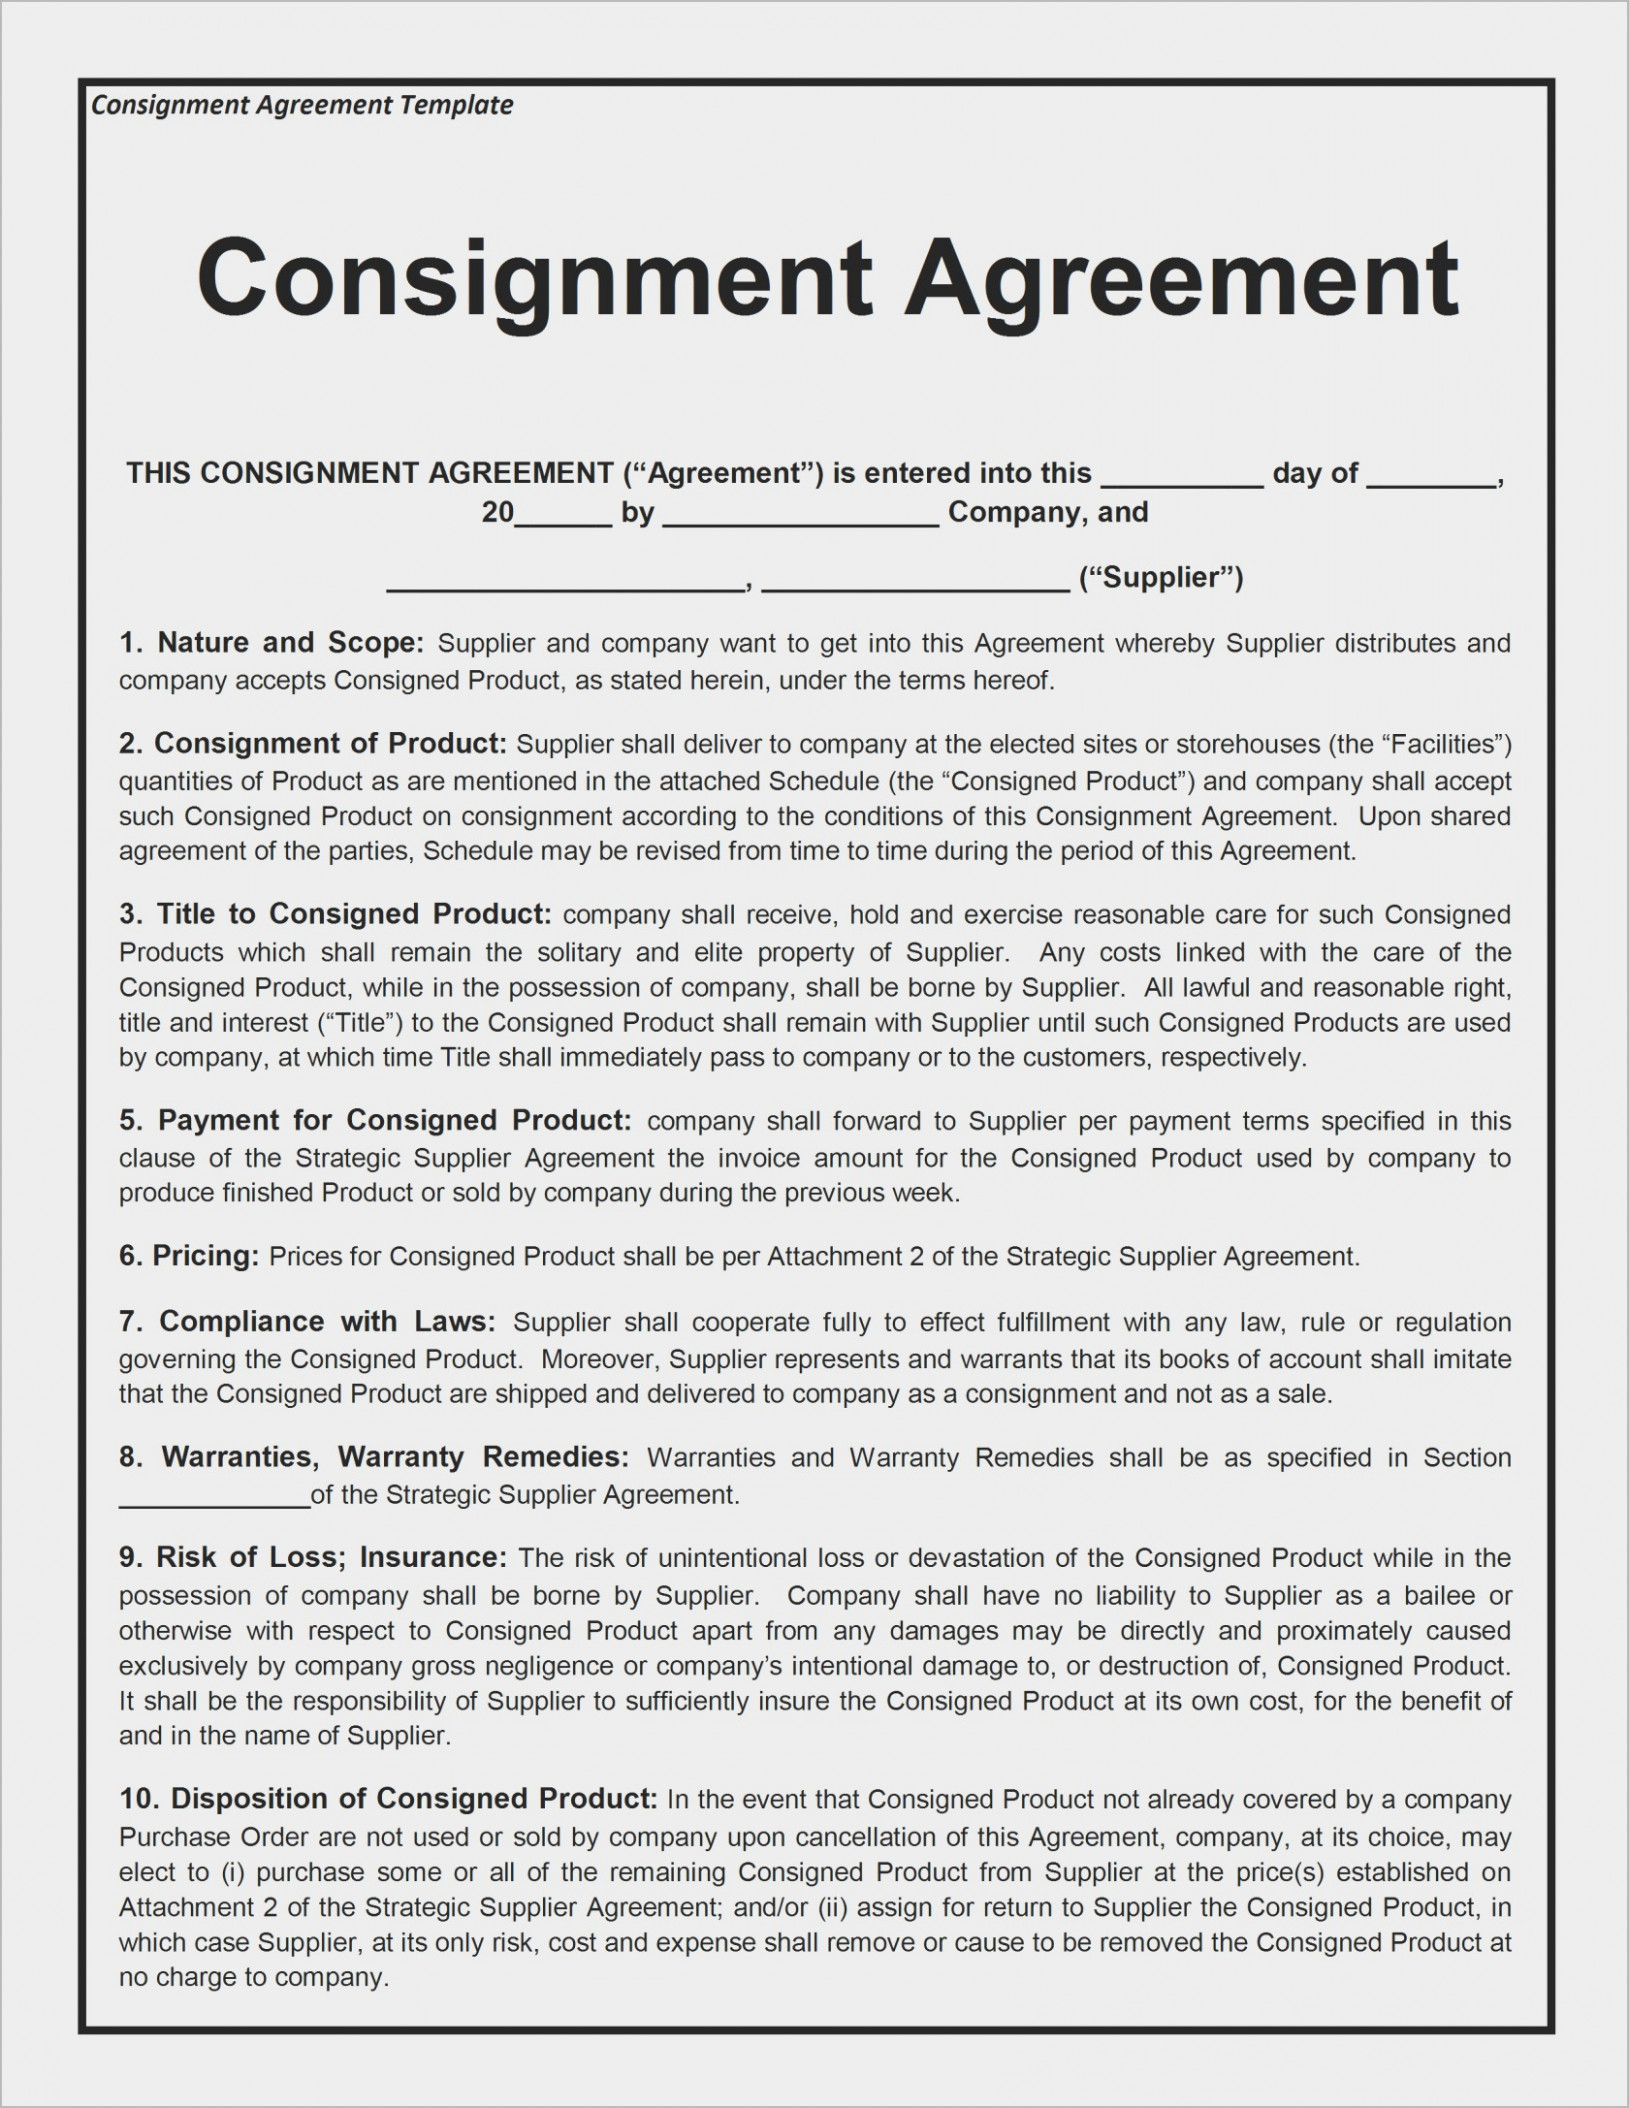 Gallery Consignment Agreement 15 Brilliant Ways To Realty Executives Mi Invoice And Resume 0993